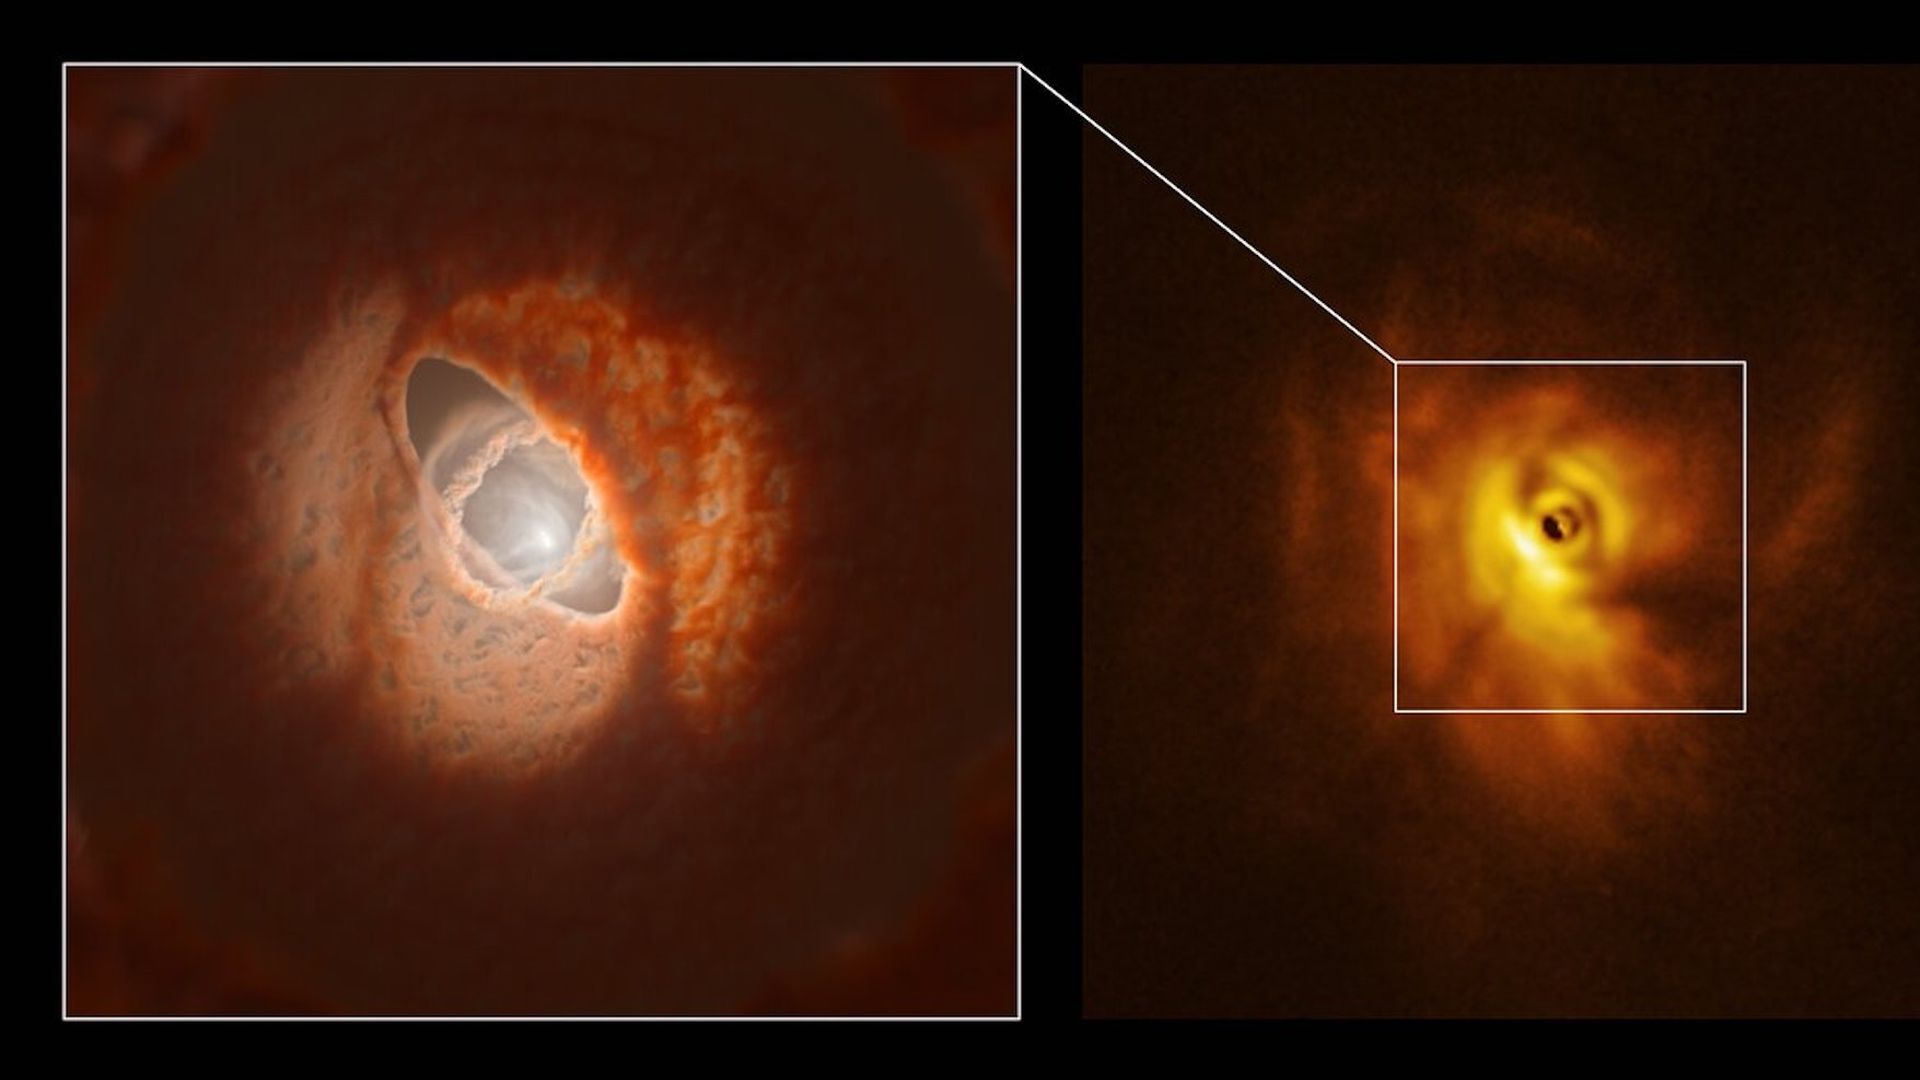 A planetary disk forming around 3 stars